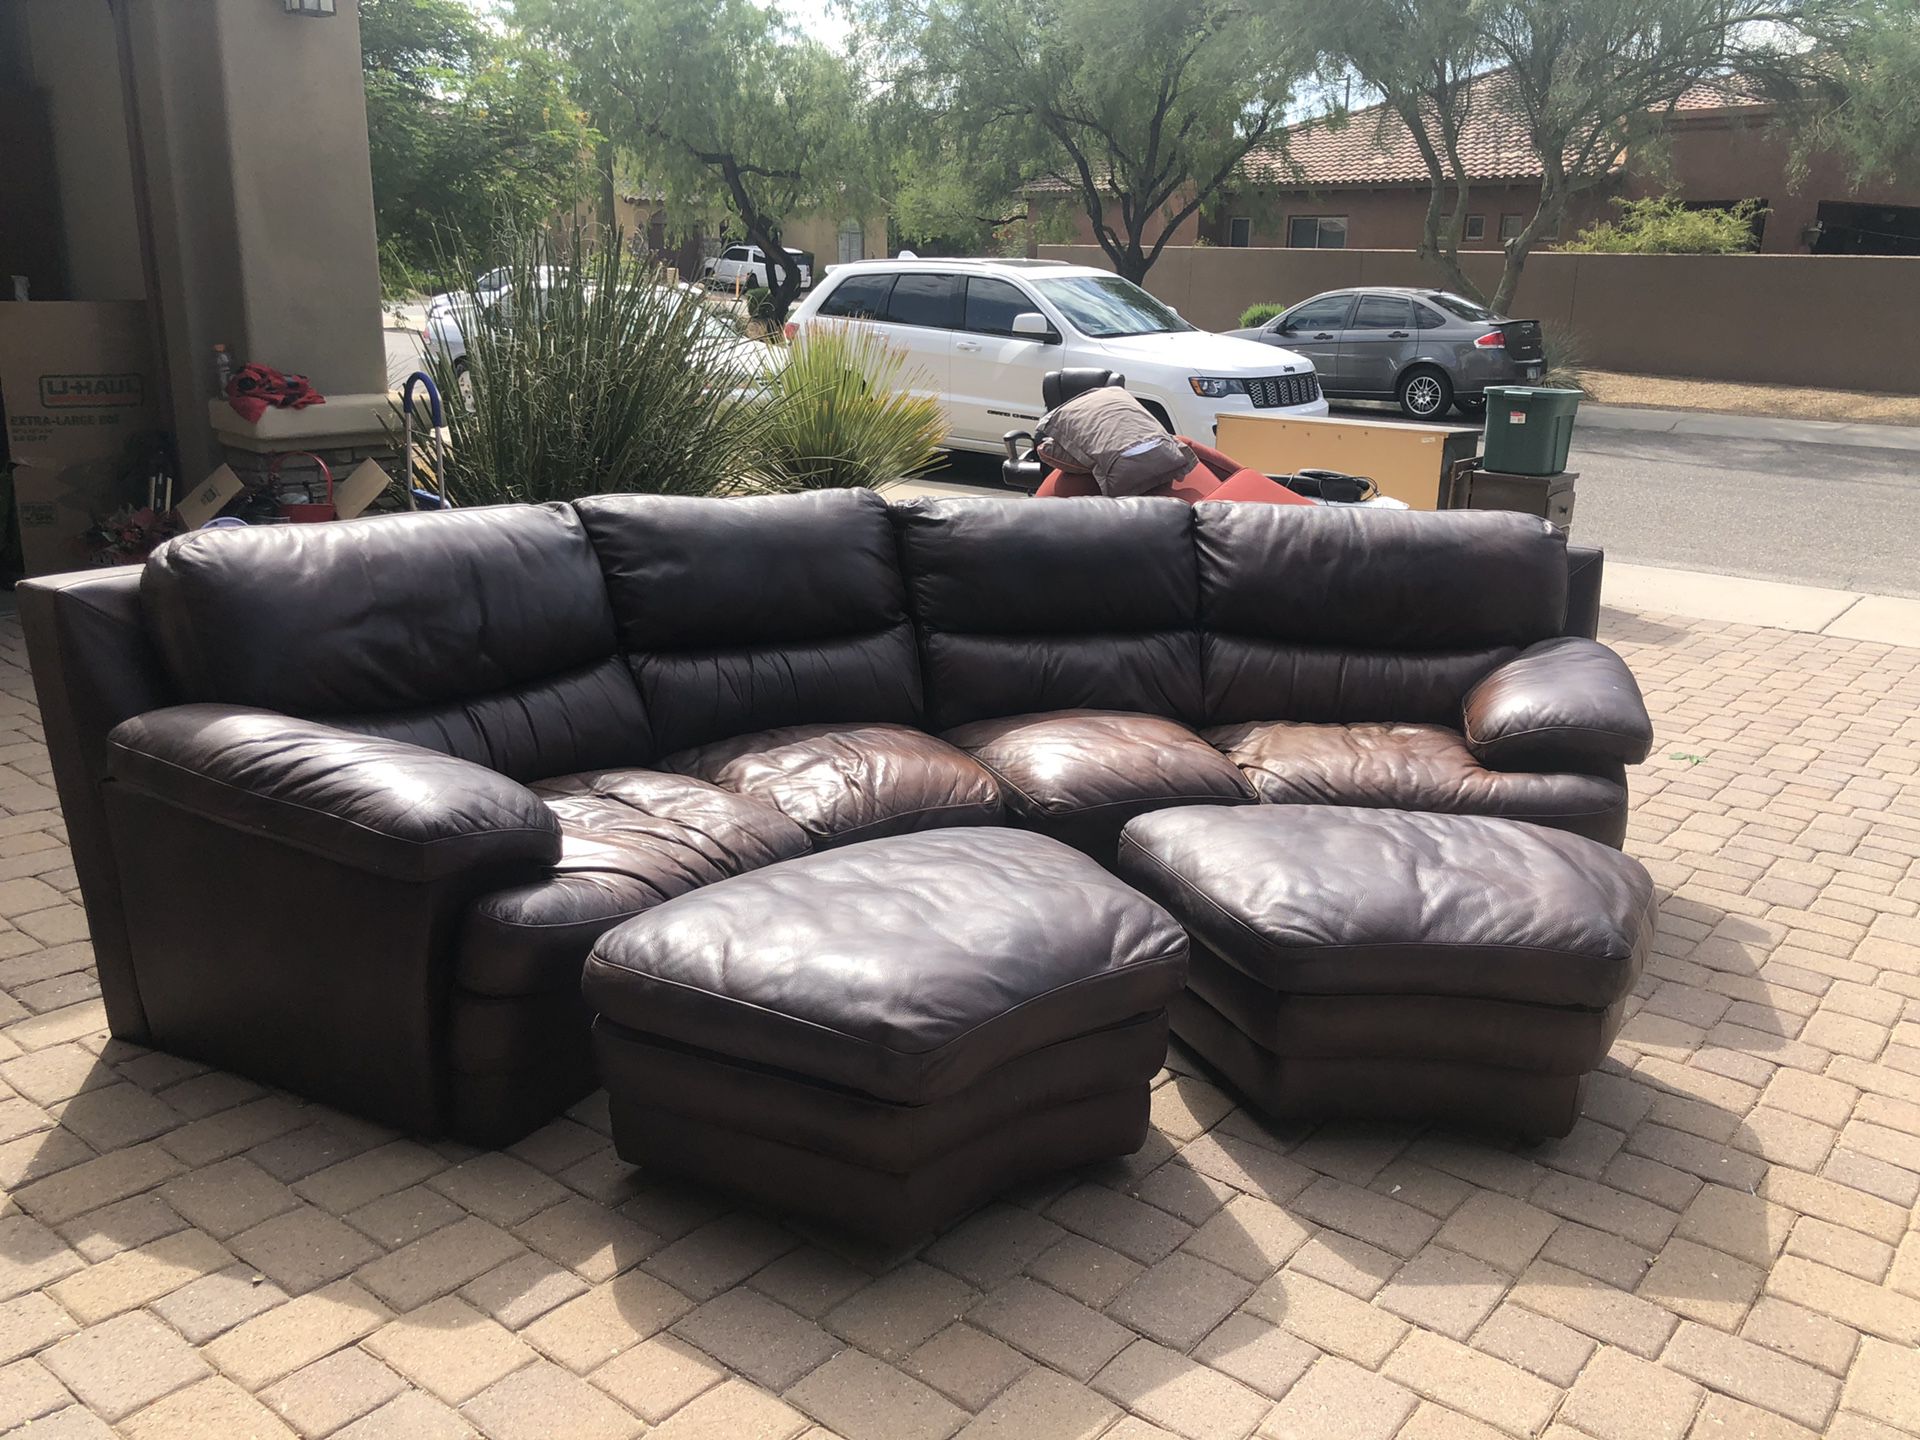 Brown Leather Couch with ottomans. Unique curved design. Original cost $2500.